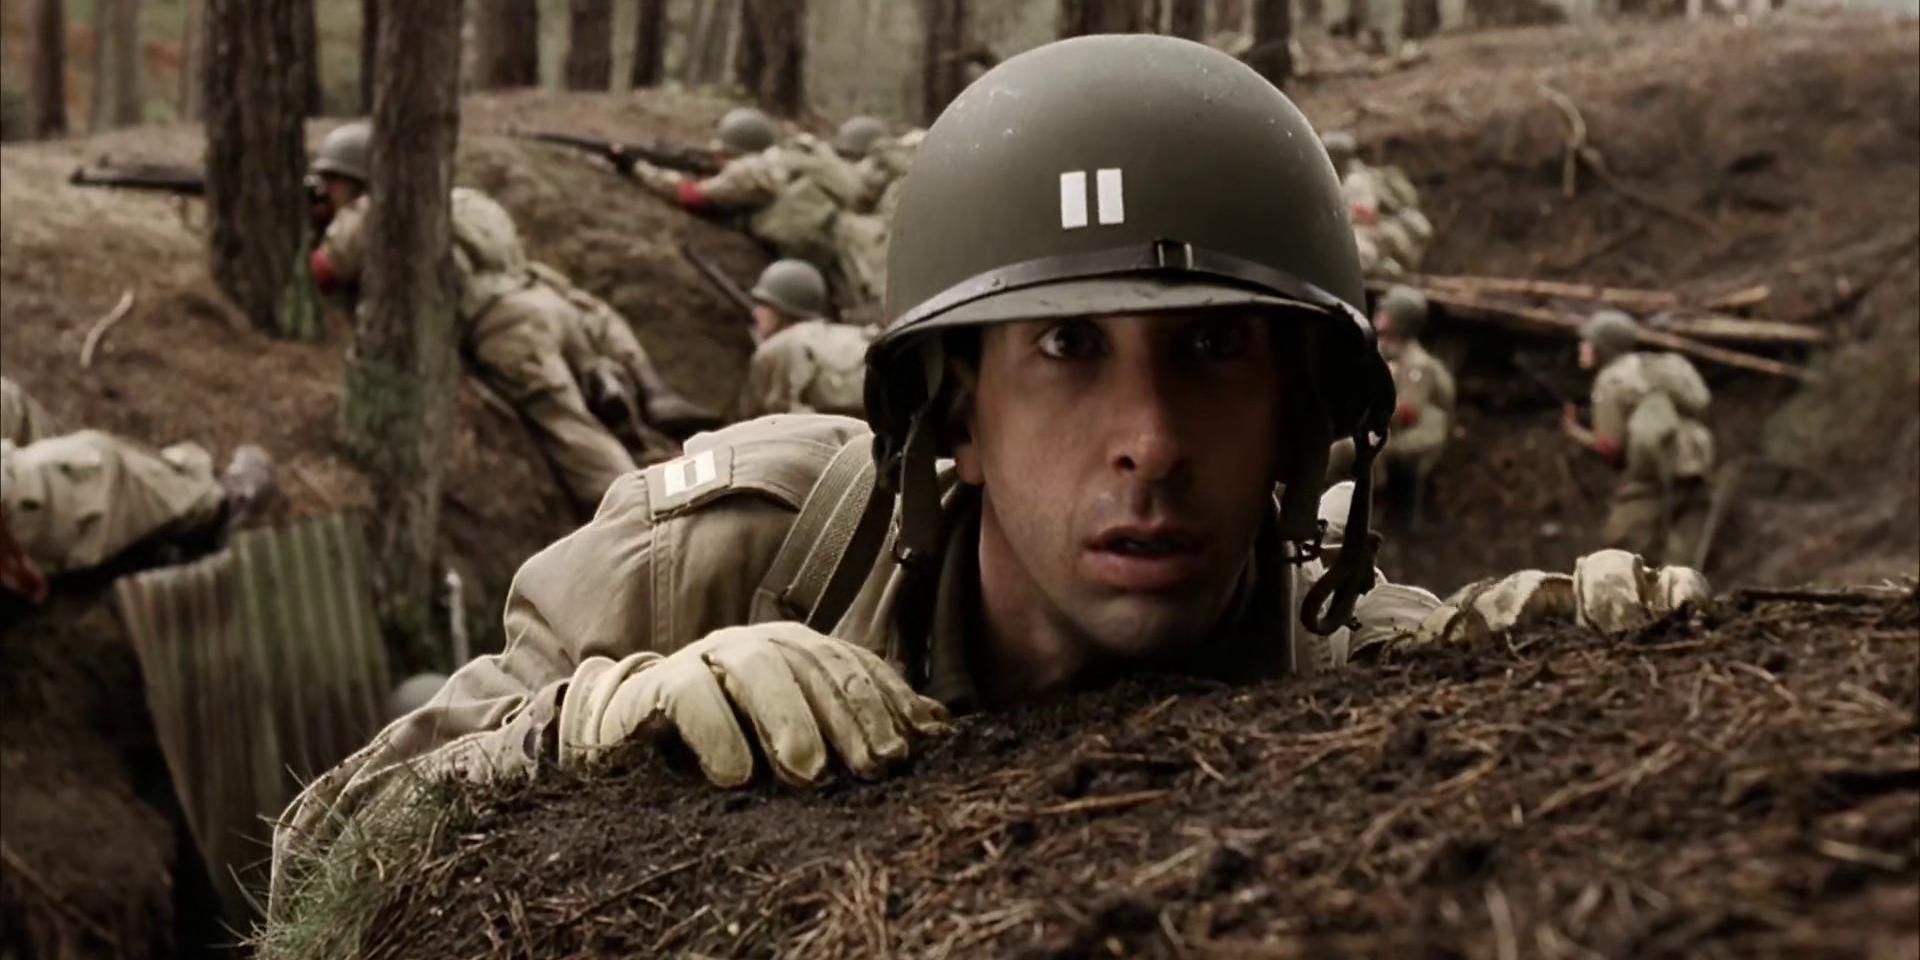 Captain Sobel (David Schwimmer) hiding during battle in Band of Brothers.